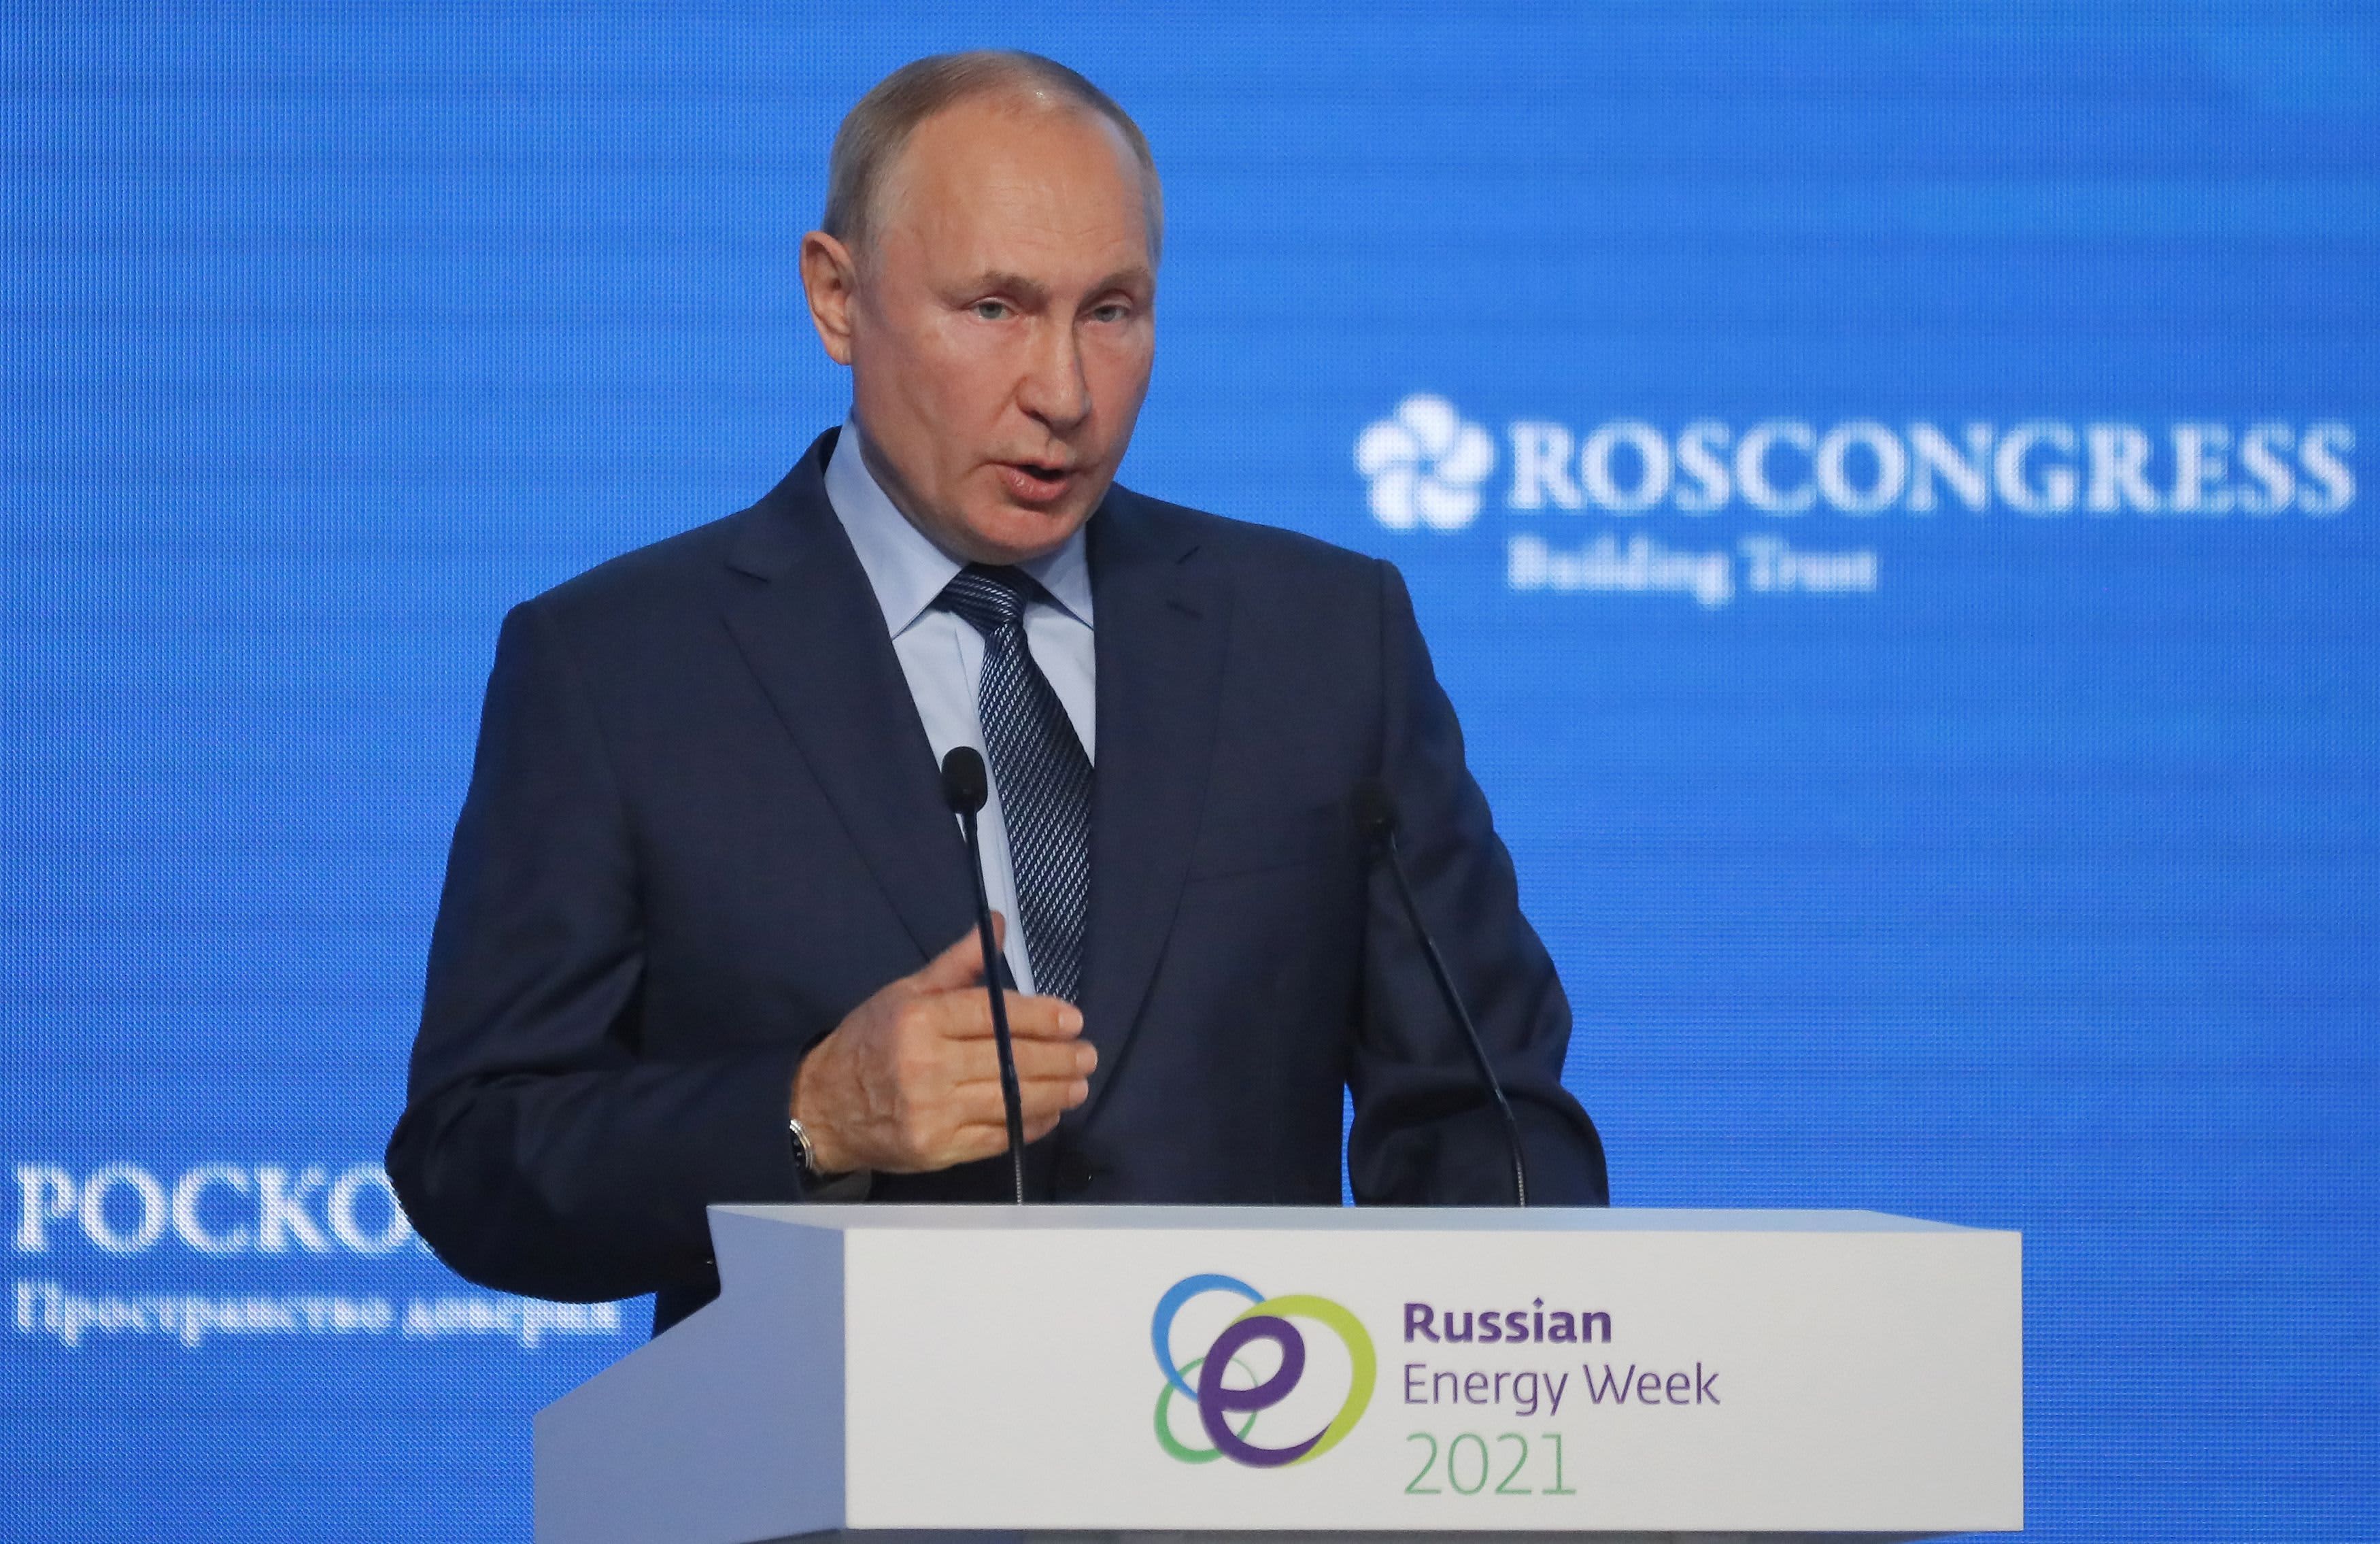 Putin says Russia is not using gas as a weapon, claims U.S. added to energy crisis - CNBC